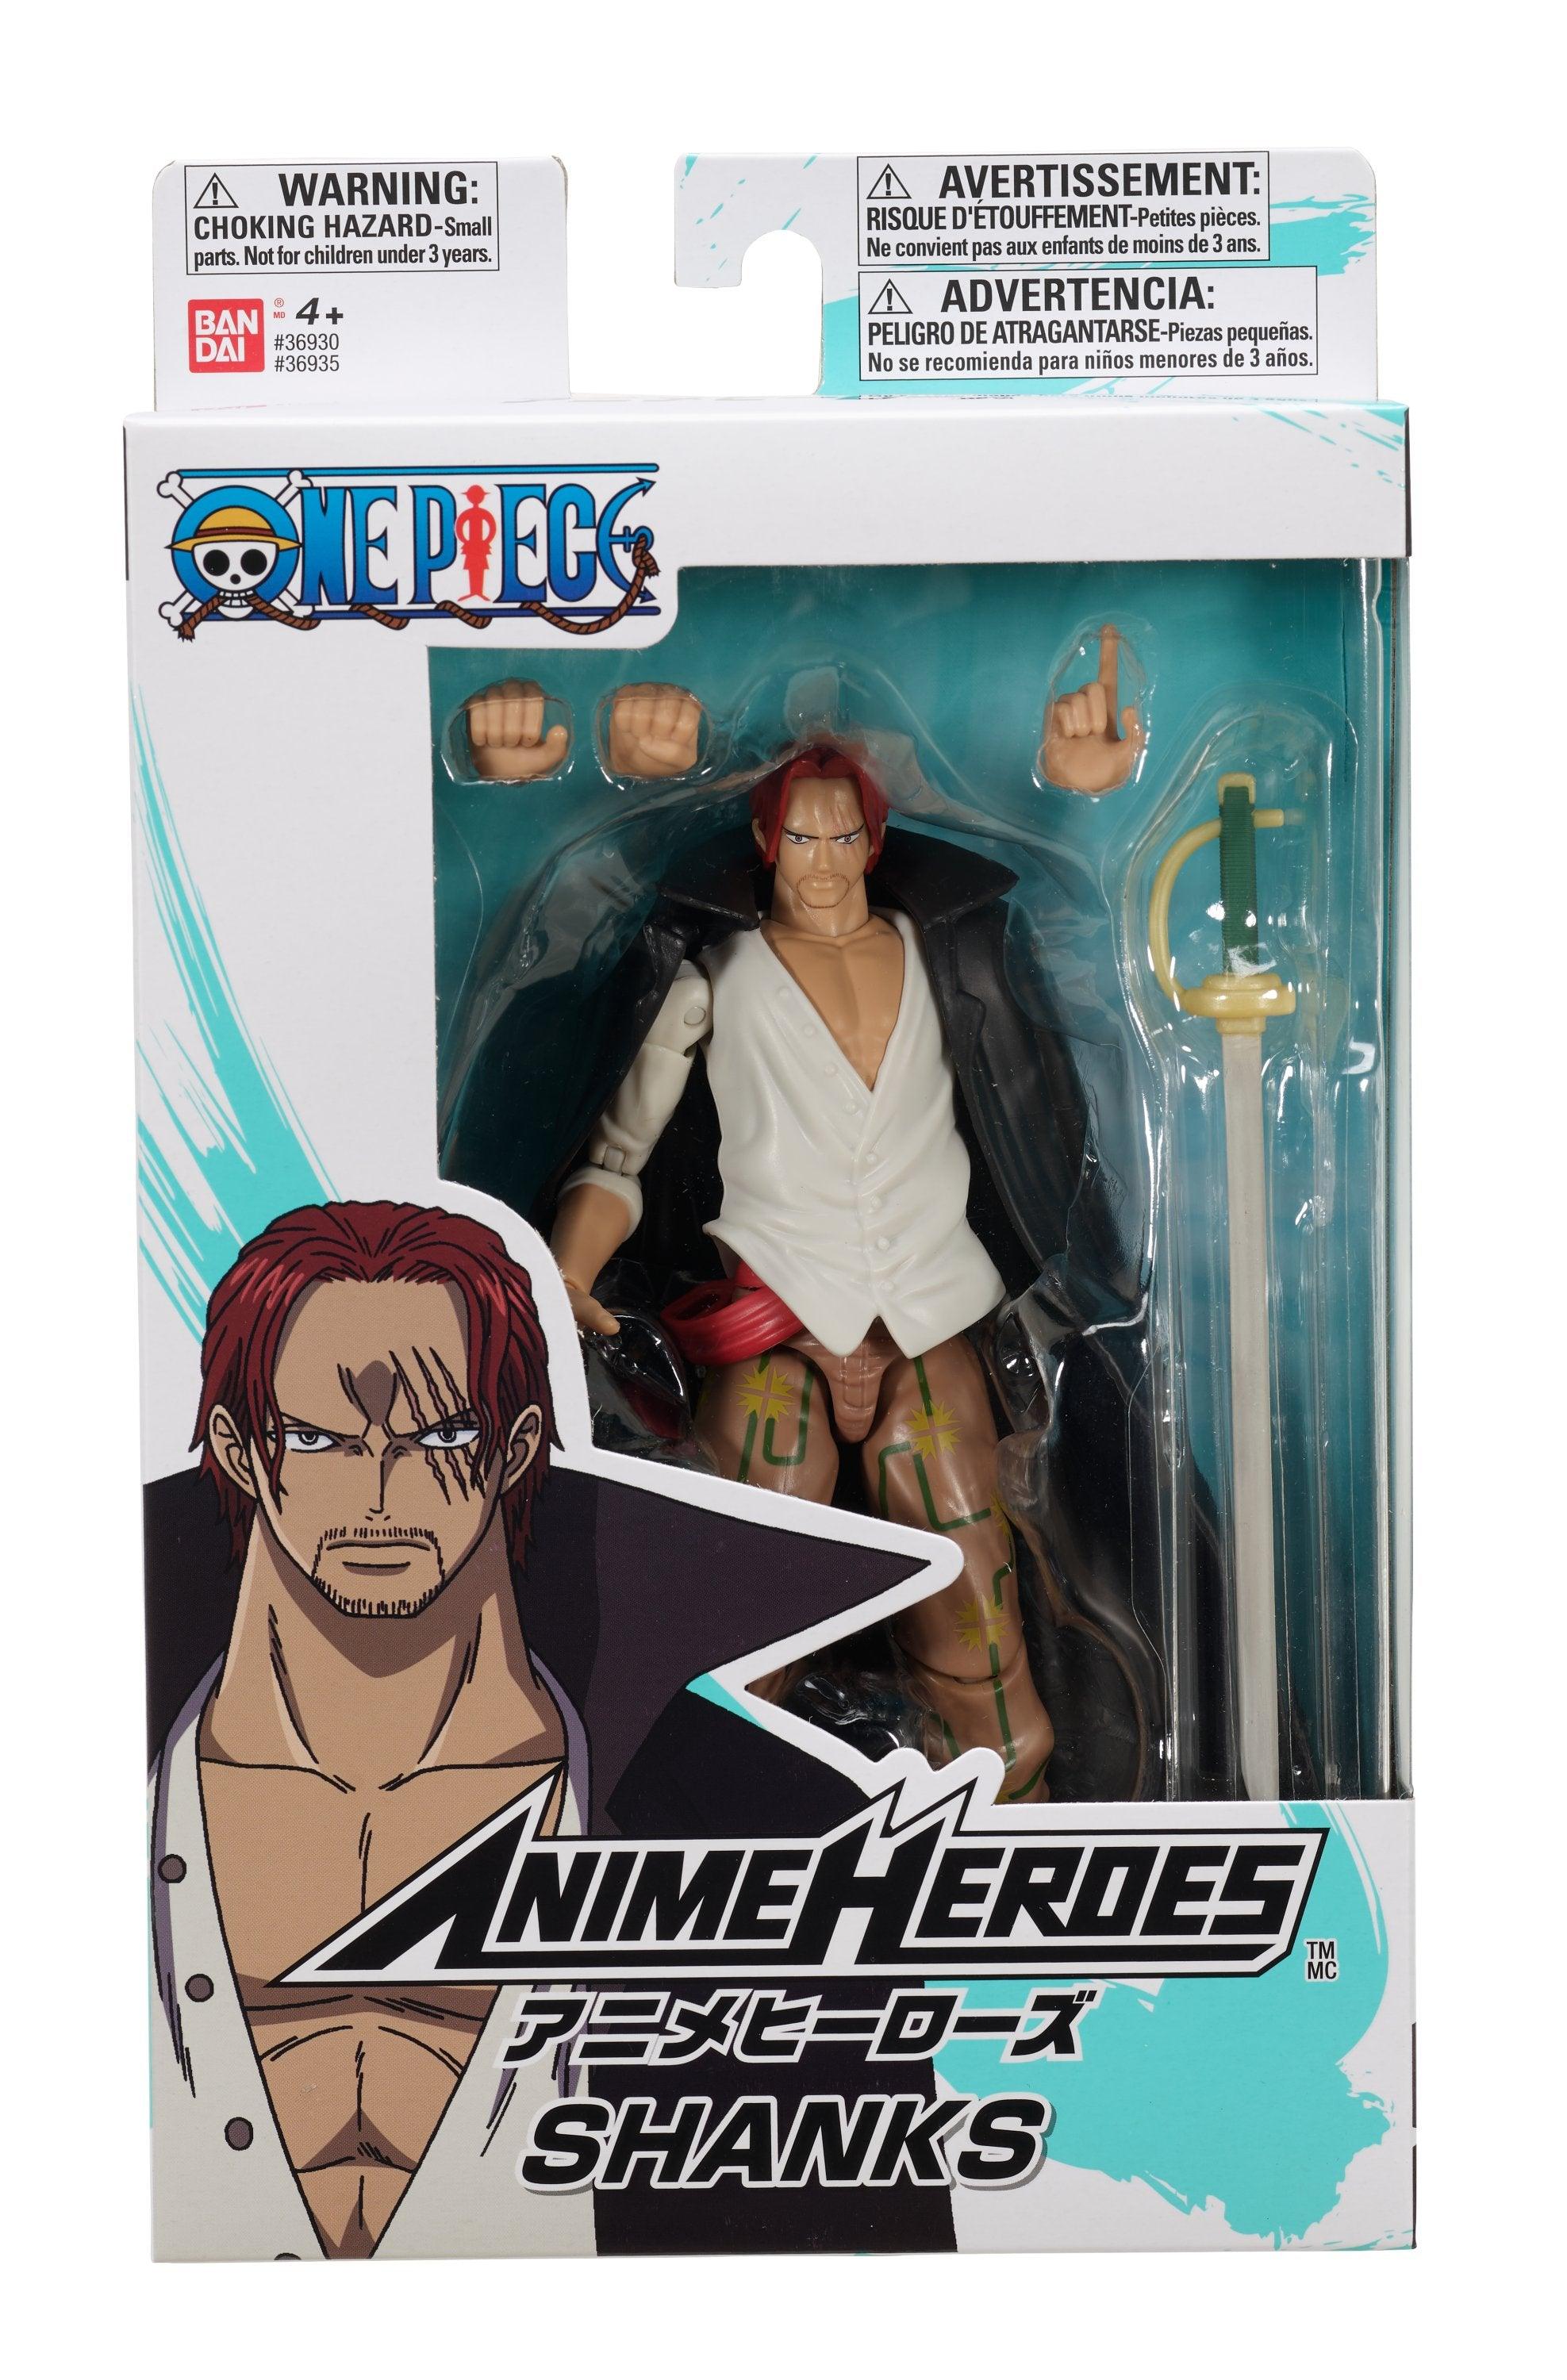 Ah One Piece Shanks - Want a New Gadget